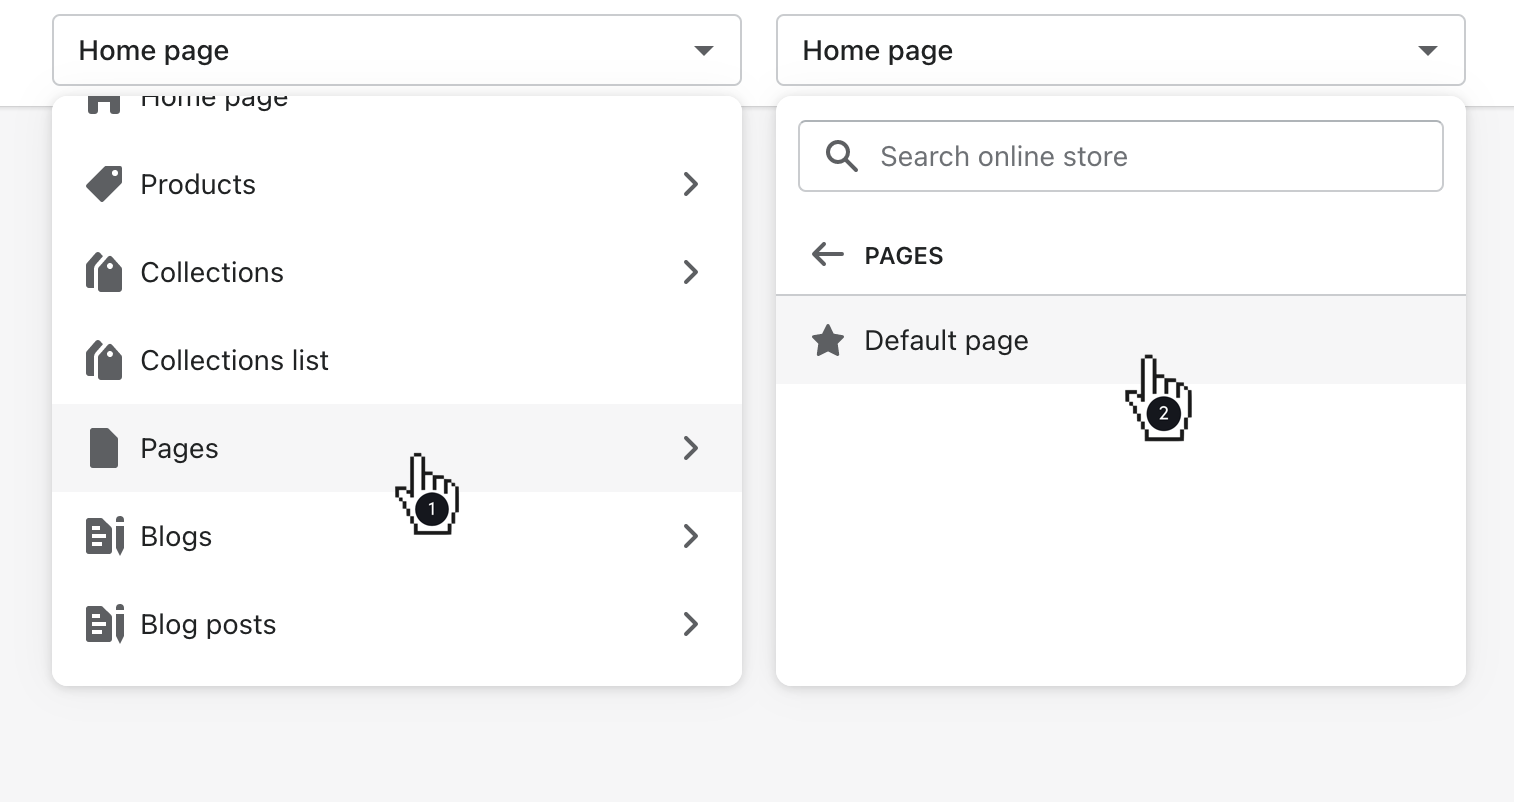 select-pages-then-default-page-to-customize